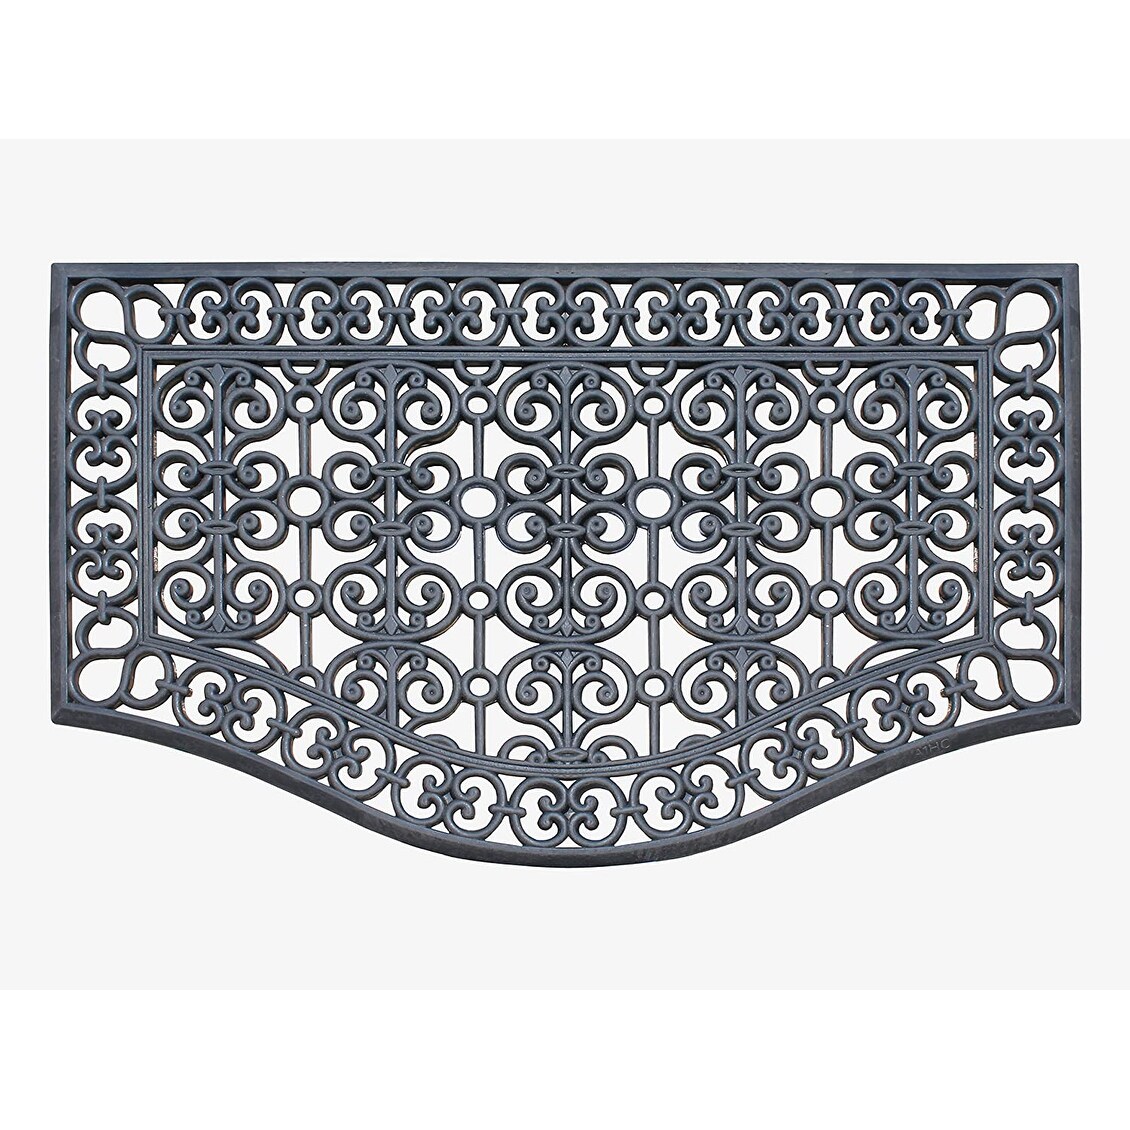 https://ak1.ostkcdn.com/images/products/is/images/direct/3c22bda28250e45ffd4c94e981df161f90914c0b/A1HC-Large-Outdoor-Floor-Door-Mat%2C-Natural-Rubber-Grill-Drainable-Design-%26-Anti-Fatigue-24%22x39%22-for-Indoor-Outdoor-Use.jpg